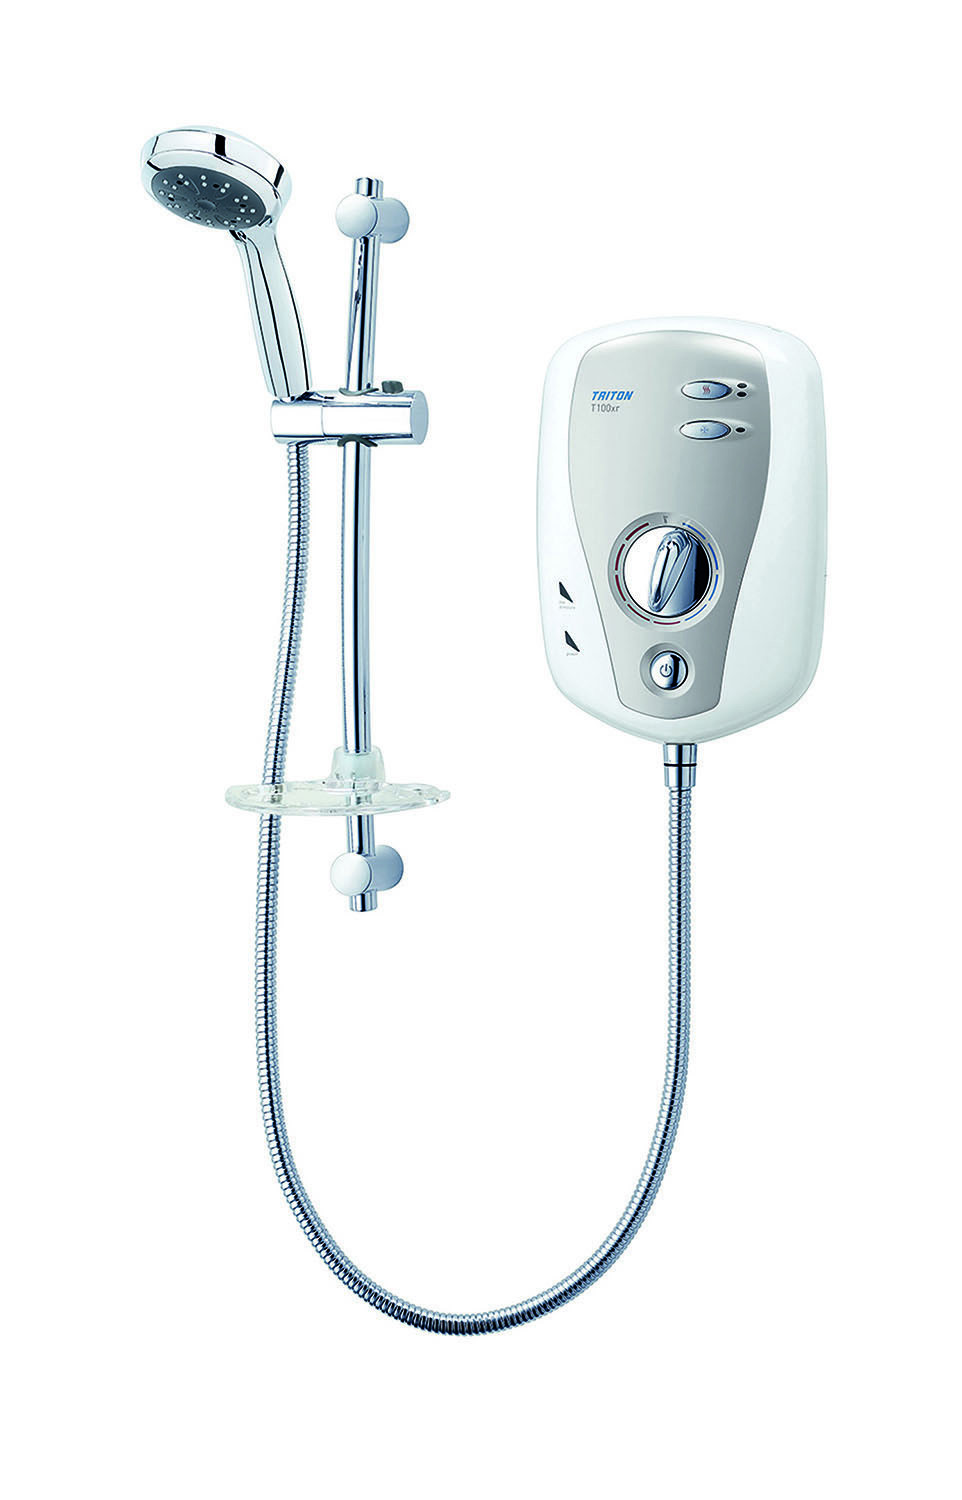 Electric Power Shower Lets You Enjoy The Best Of Two Worlds